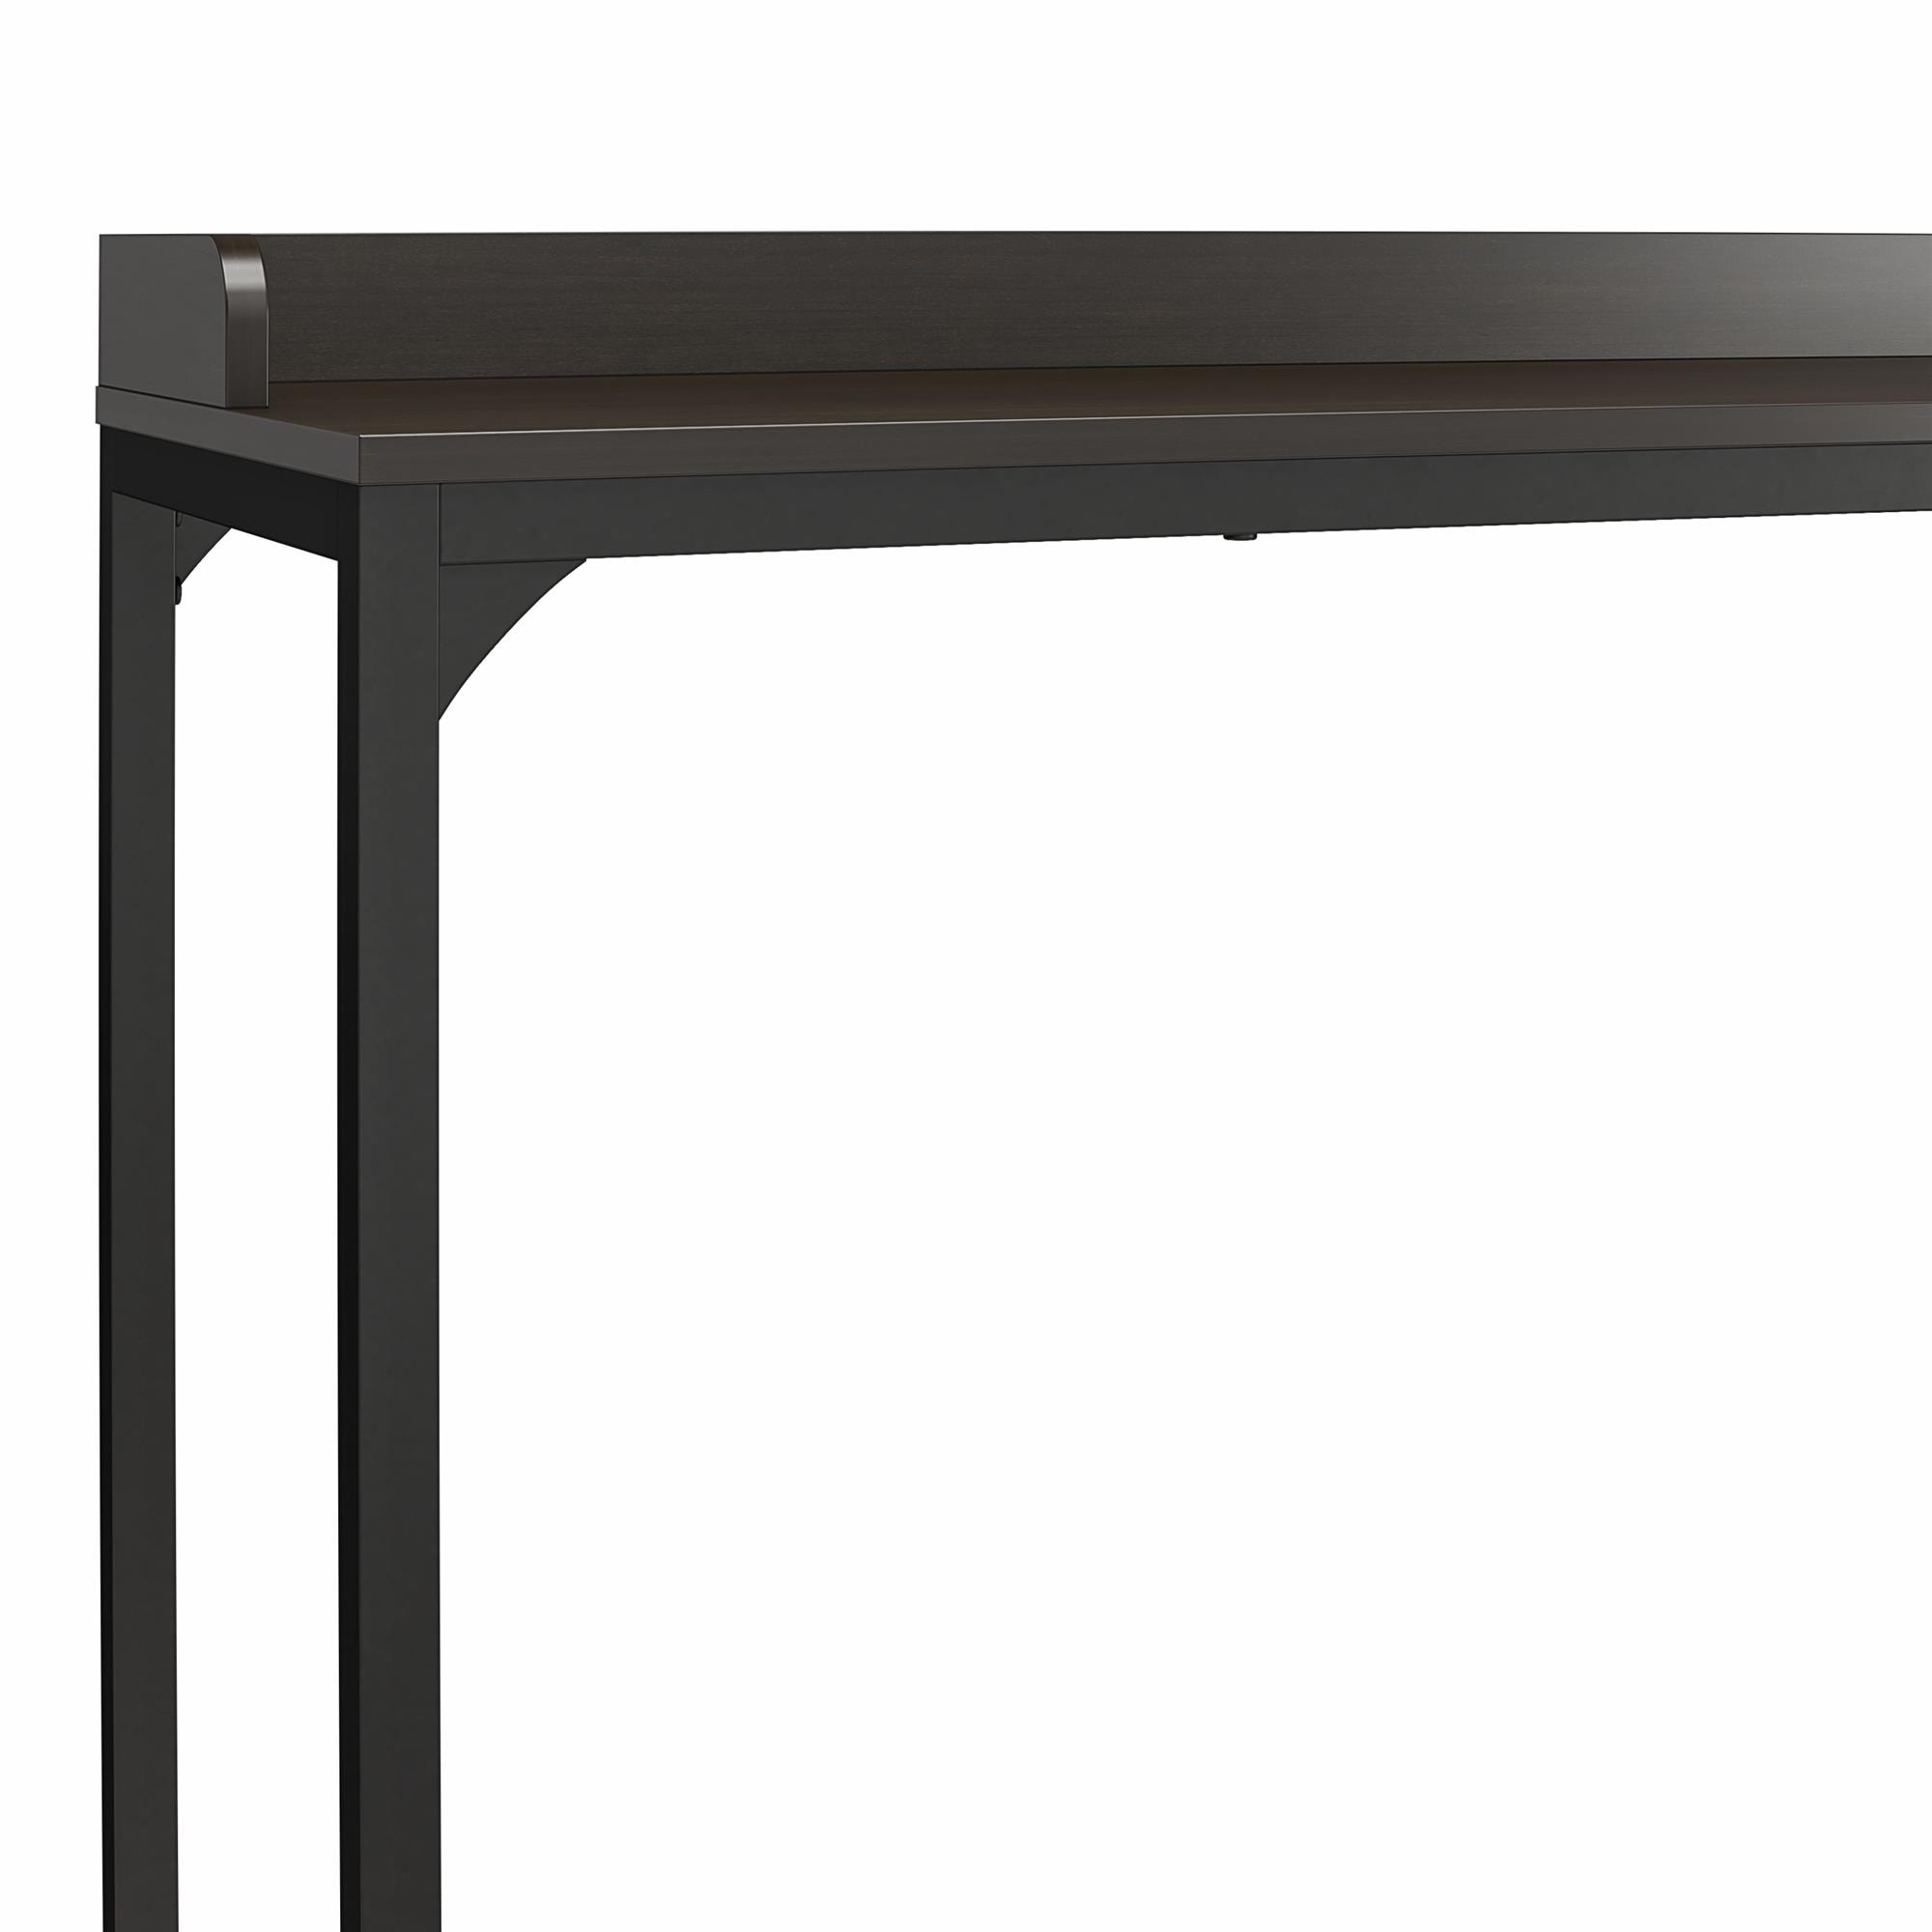 Buy Black Bedroom Desk: 5 Options (with Reviews)